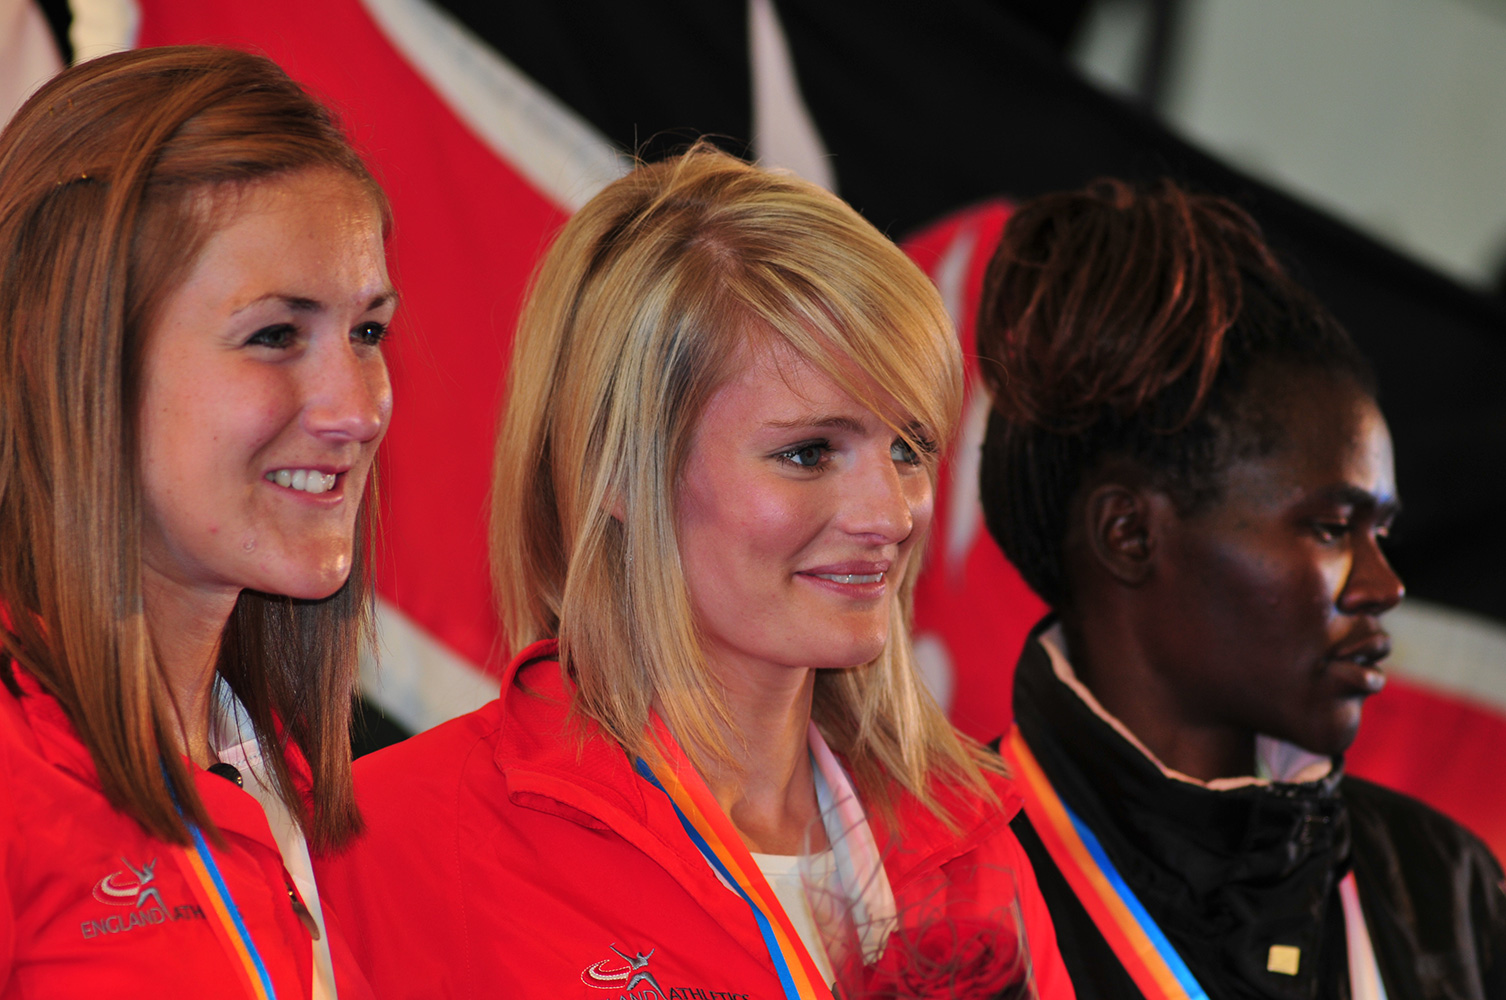 I shot this event in Keswick, Cumbria for the I.A.U. from 17th - 20th September 2009. This is Katie Ingram & Sarah Tunstall of Great Britain, and Pamela Bundotich of Kenya on the podium after the Women's Mountain Race.